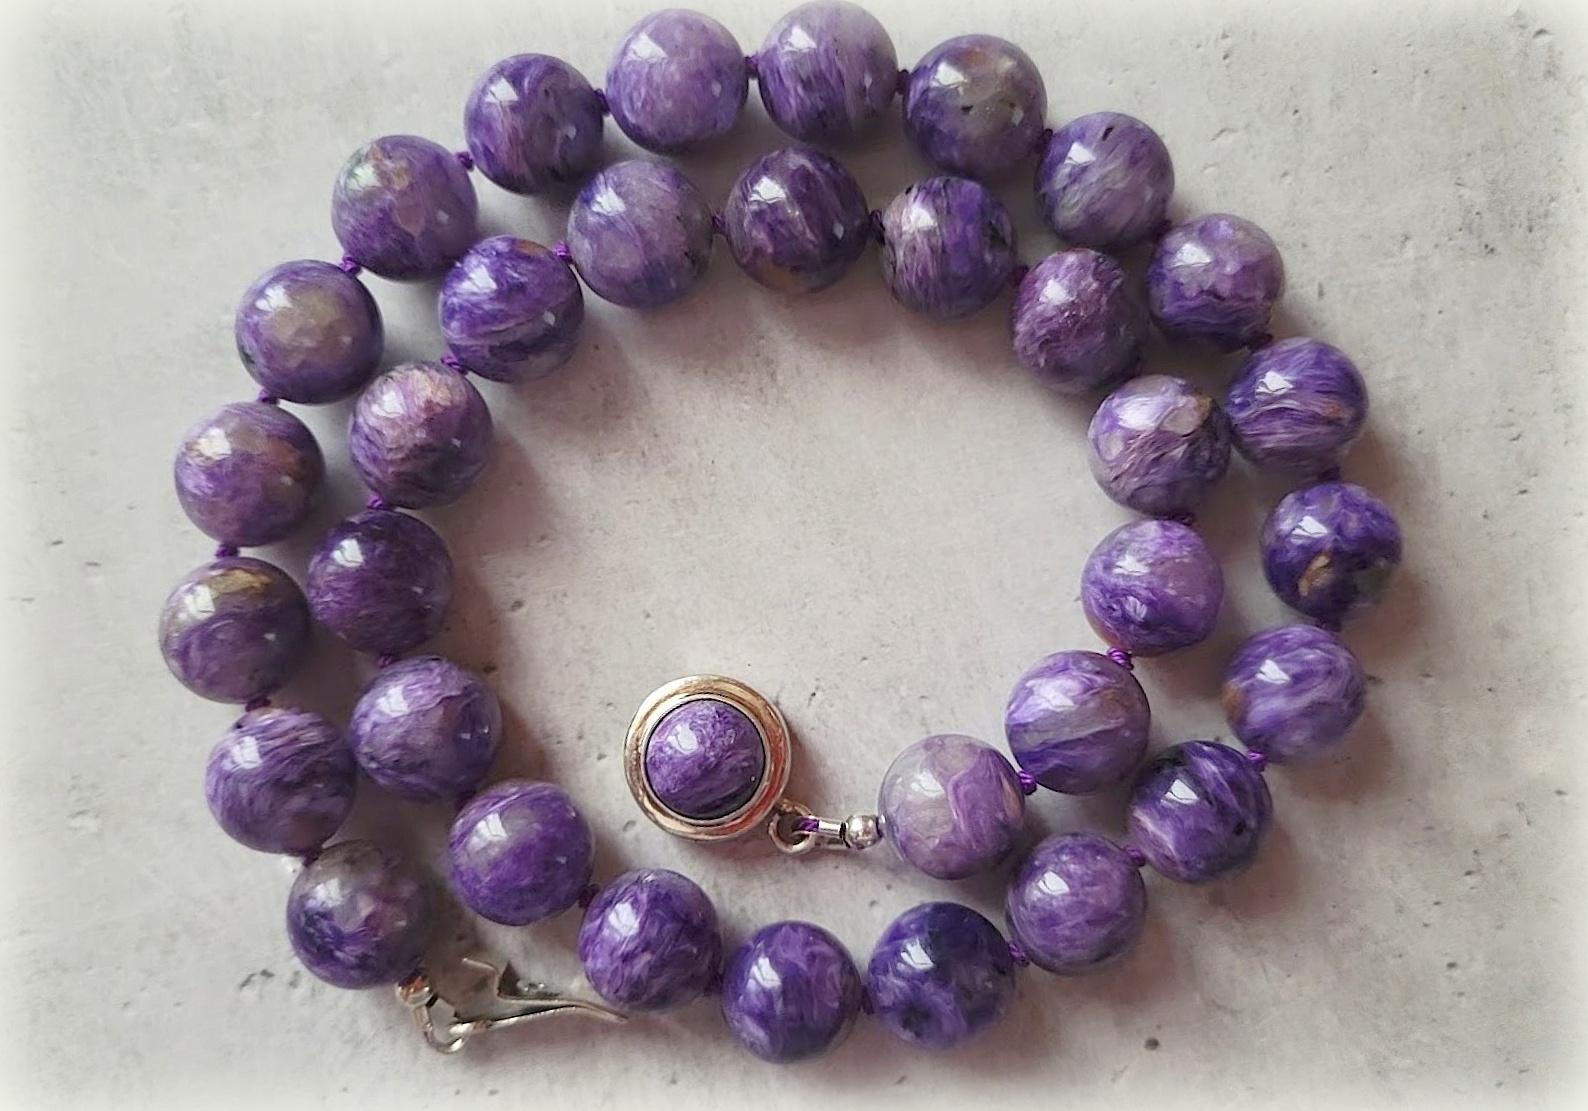 The length of the necklace is 18.5 inches (47 cm). The size of the smooth round beads is 12mm.
The color of the beads is unusual, with a silk effect. Charoite color is non-uniform and can change its tone at different angles. Its color varies from